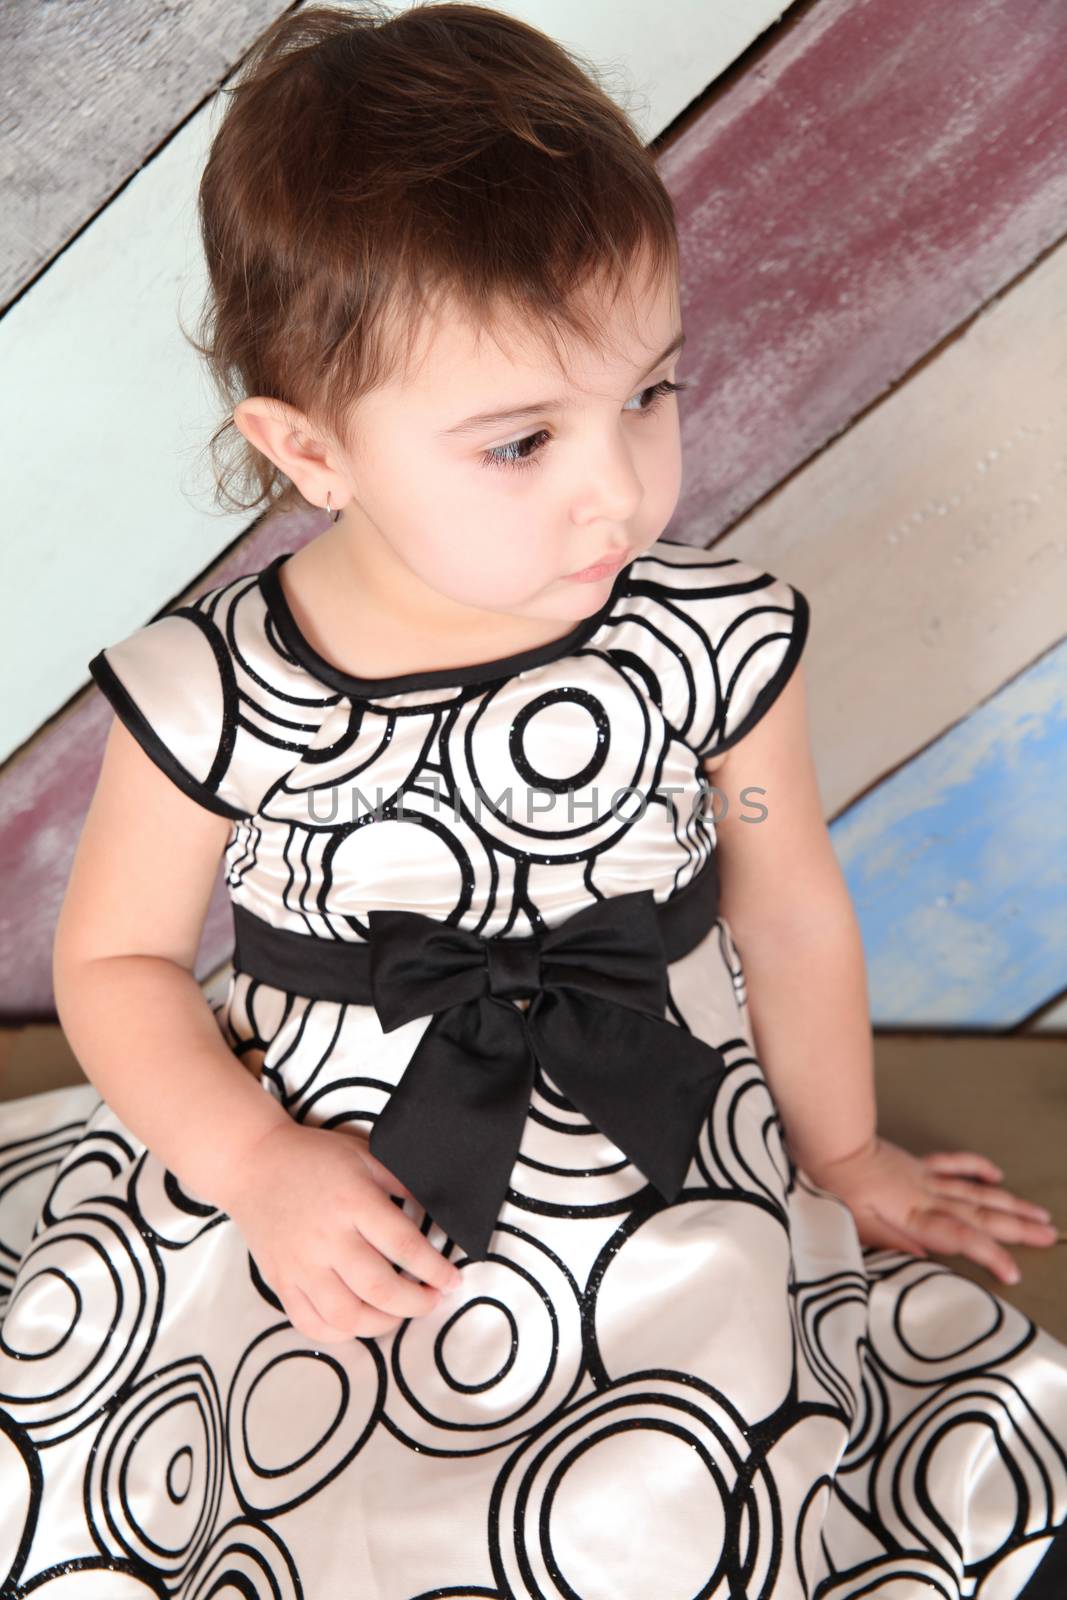 Beautiful brunette toddler girl against a striped background